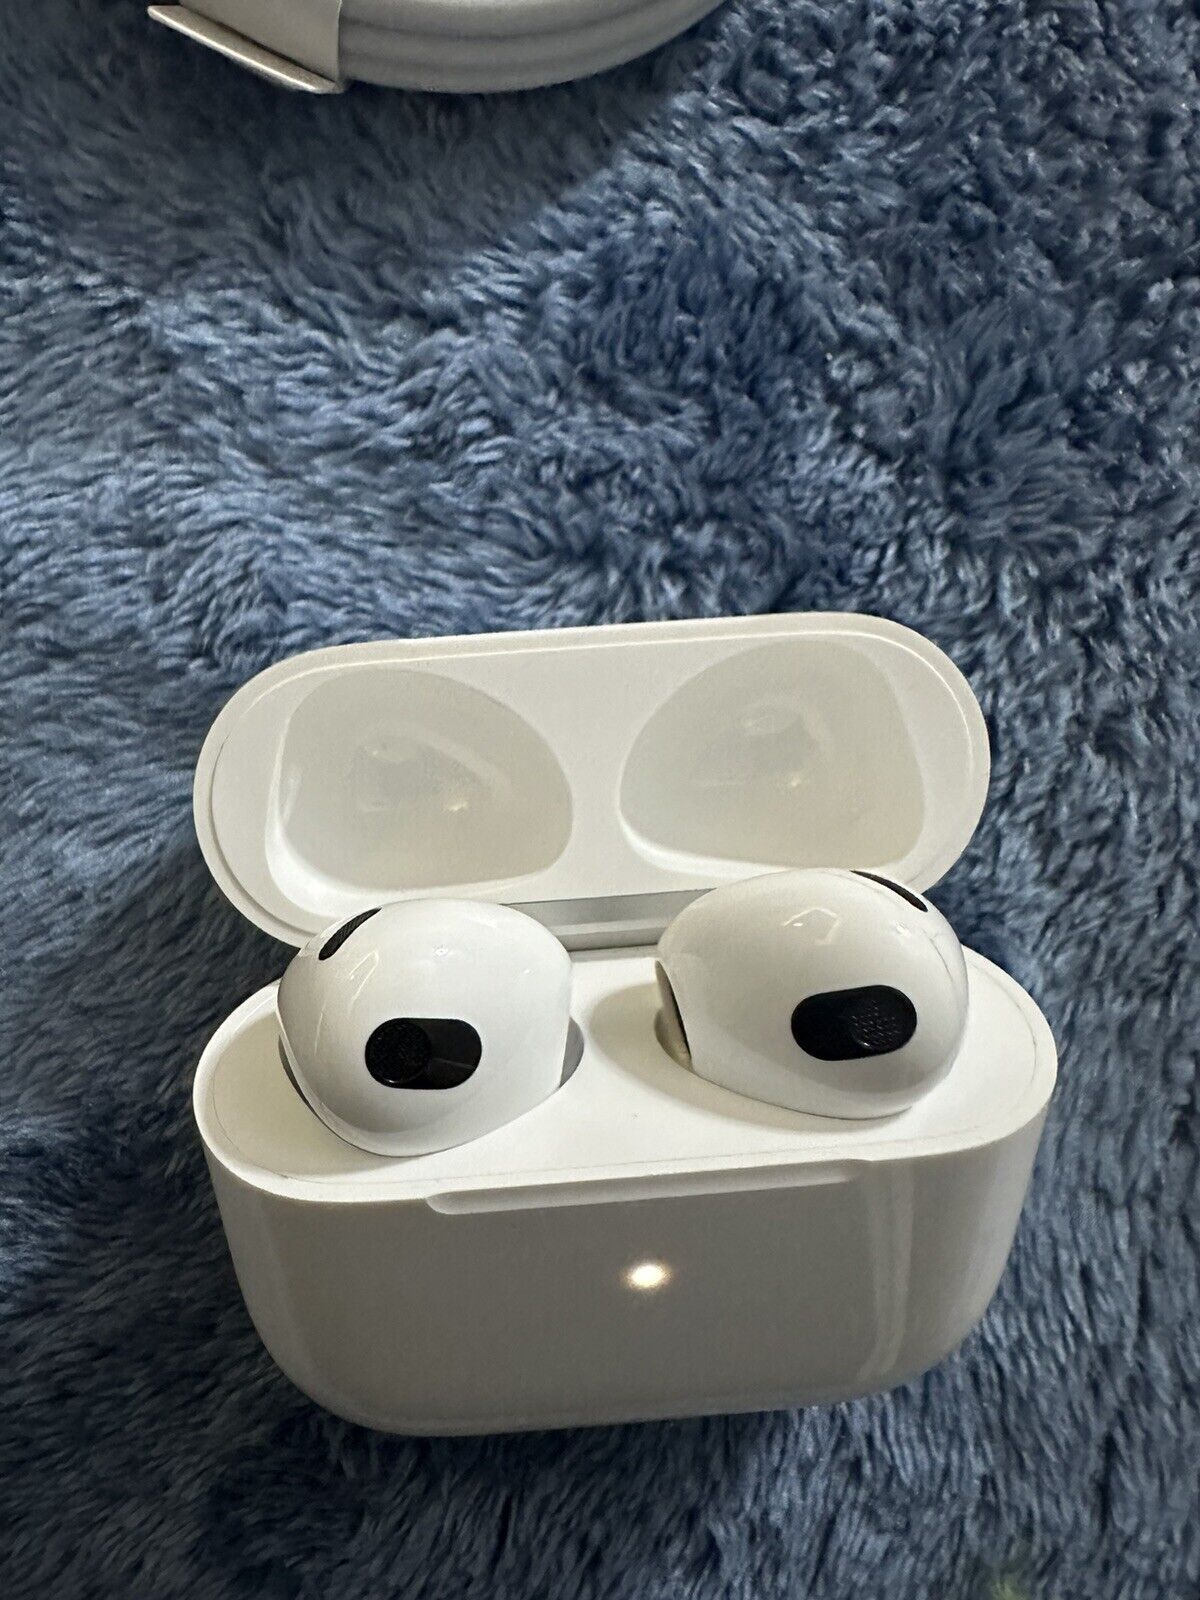  AirPods 3rd Generation with MagSafe Charging Case - White NEW & SEALED